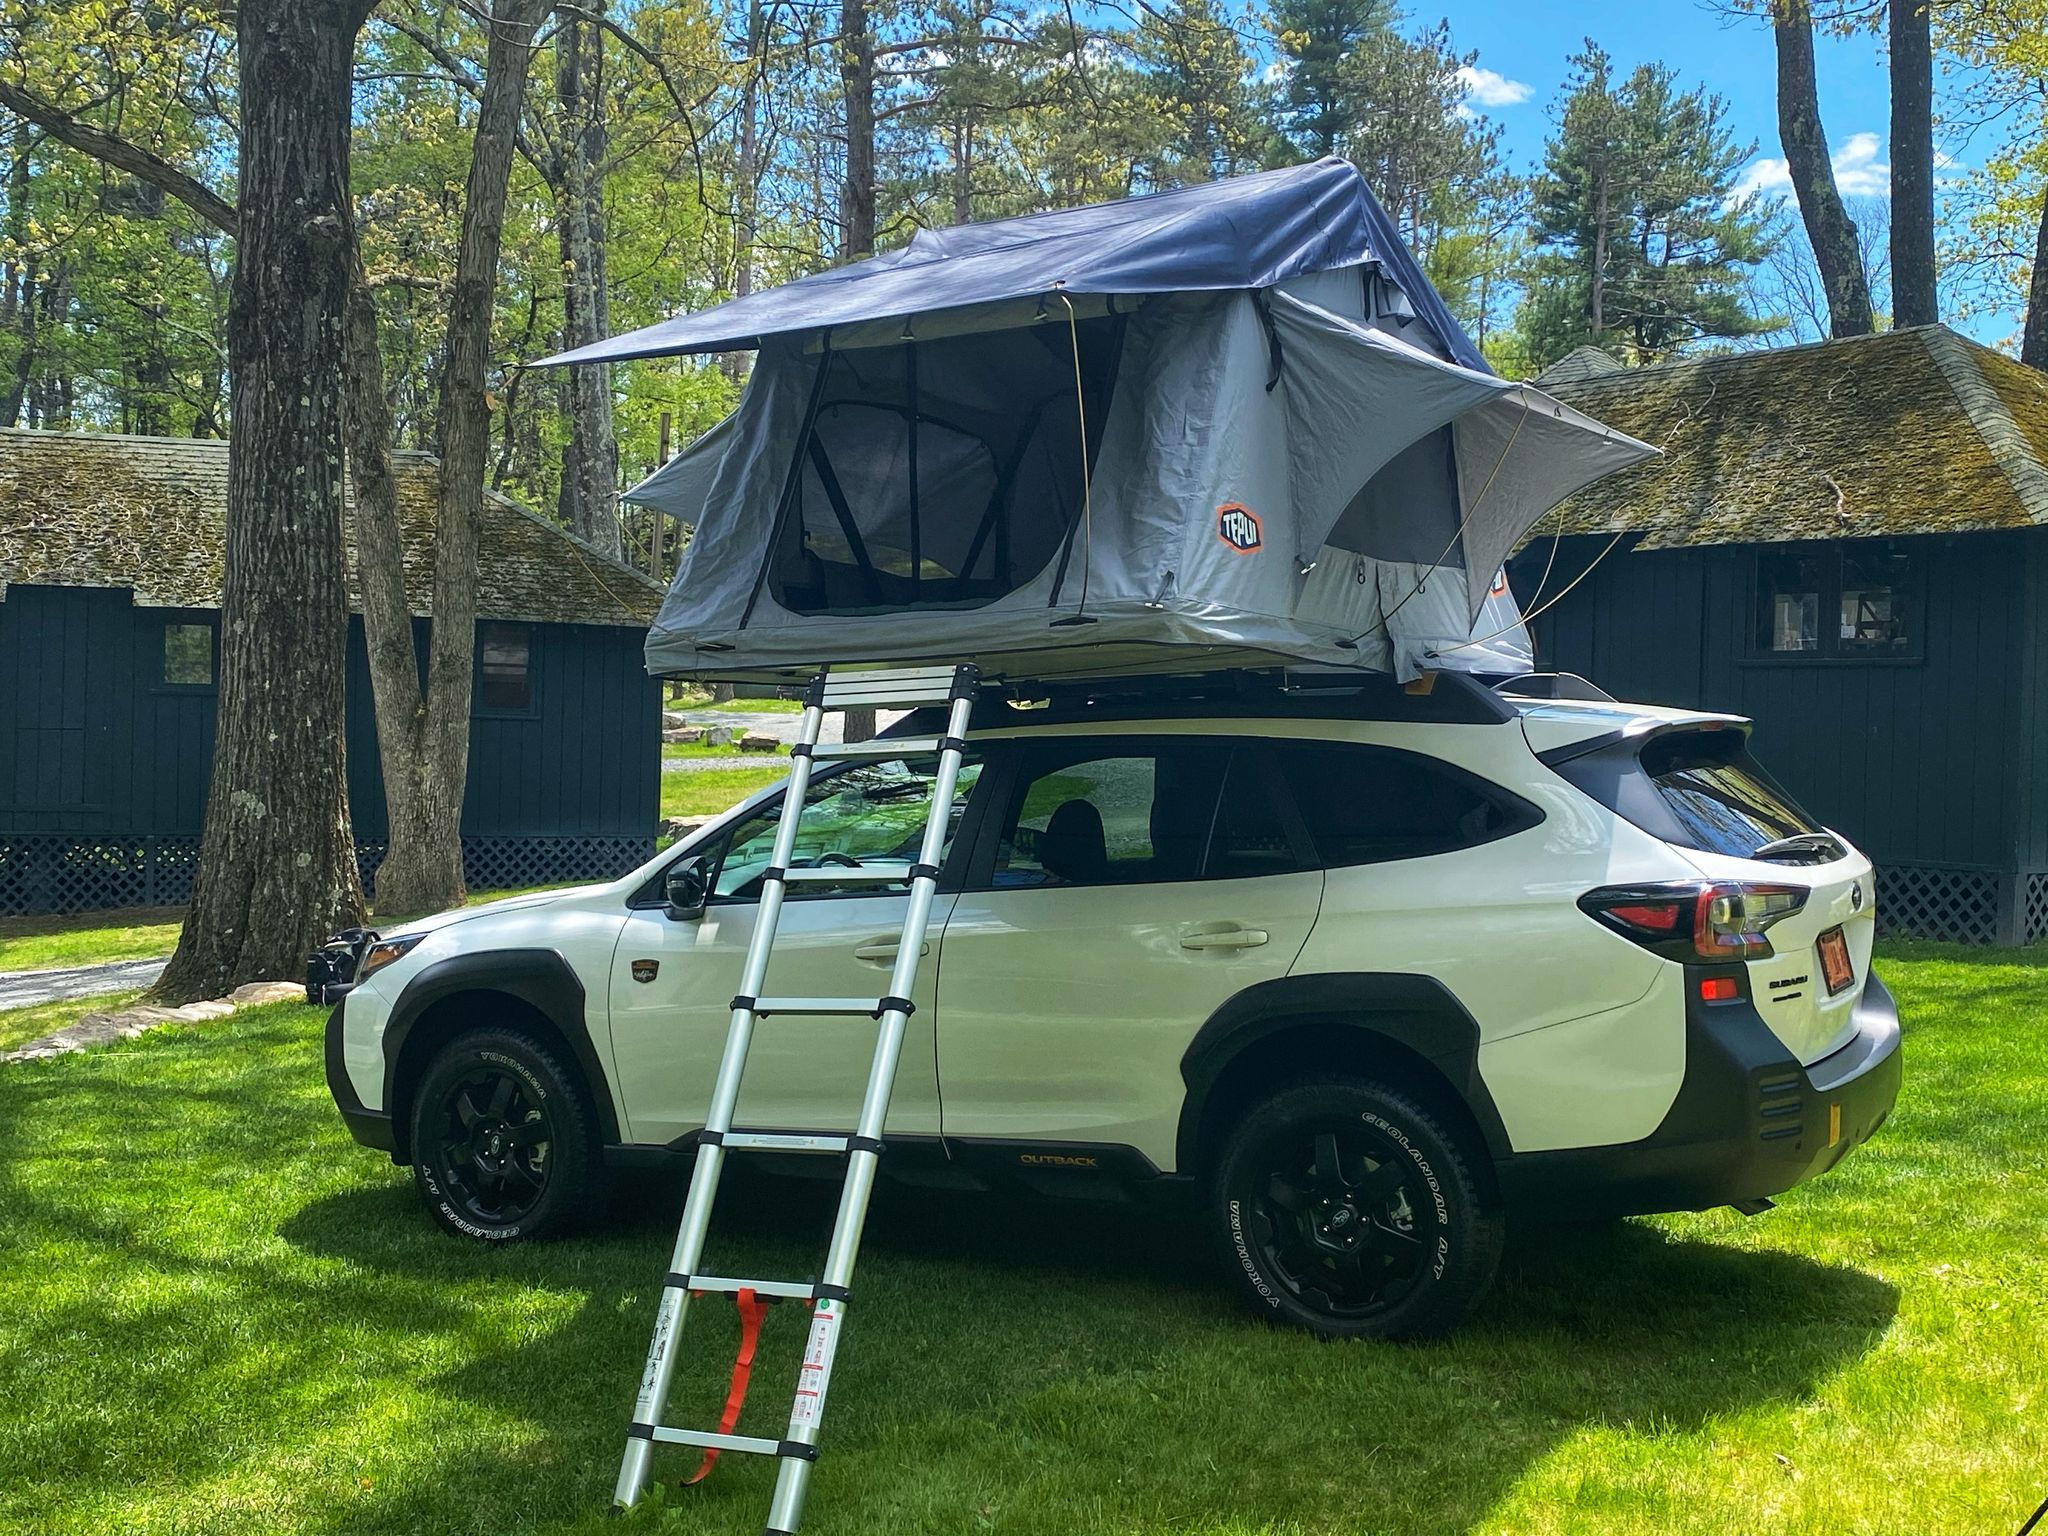 Camping In Style On The Wilderness